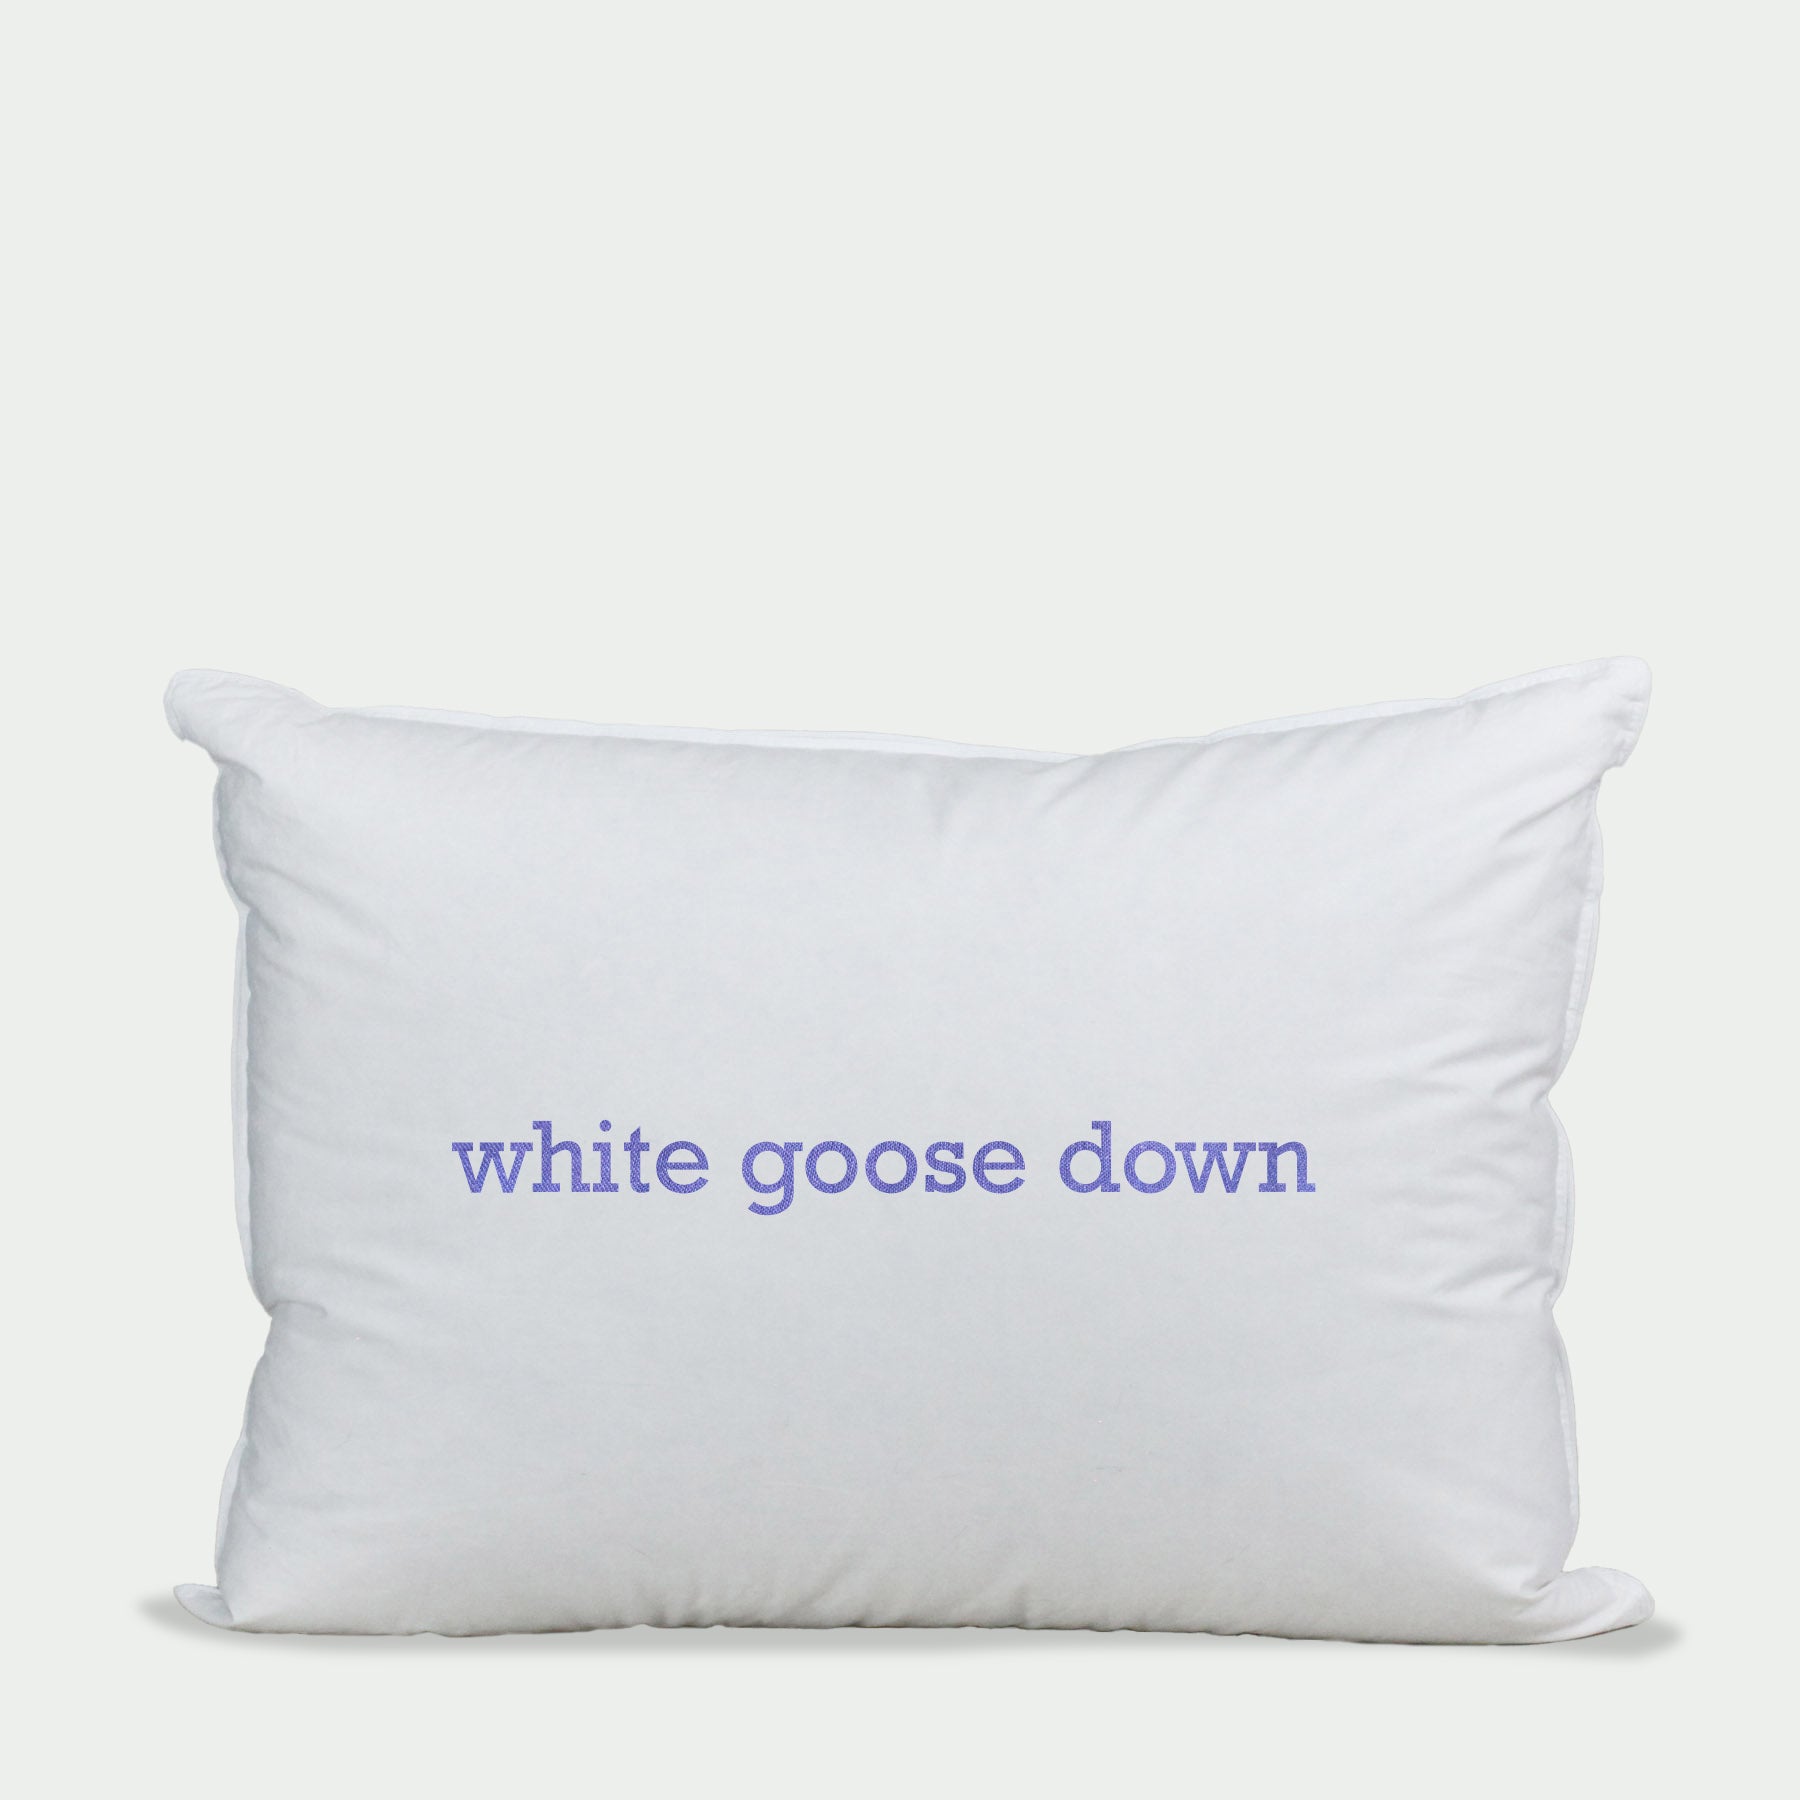 all white goose down pillow preassembled with pillow protector